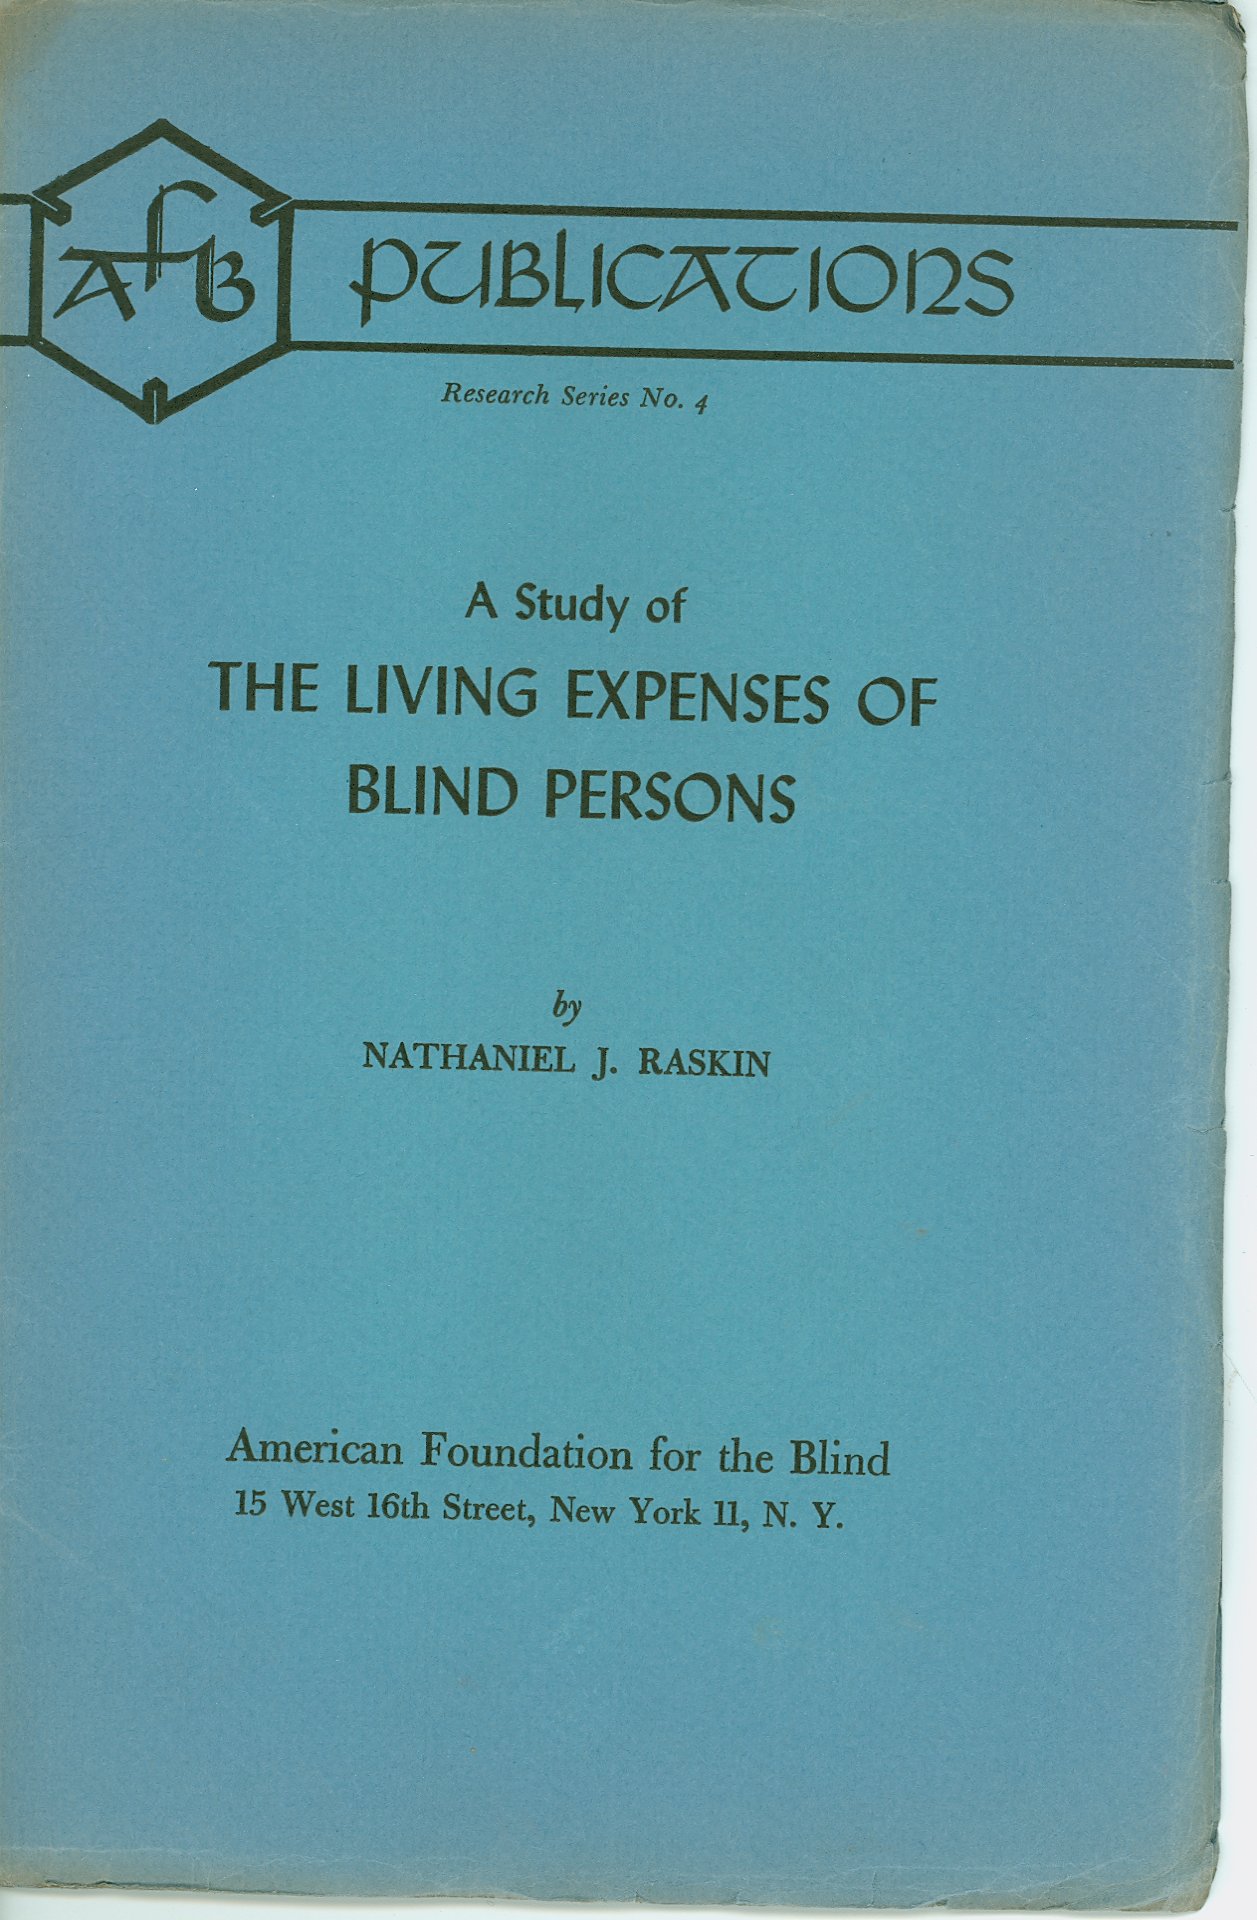 A Study of the Living Expenses of Blind Persons-1